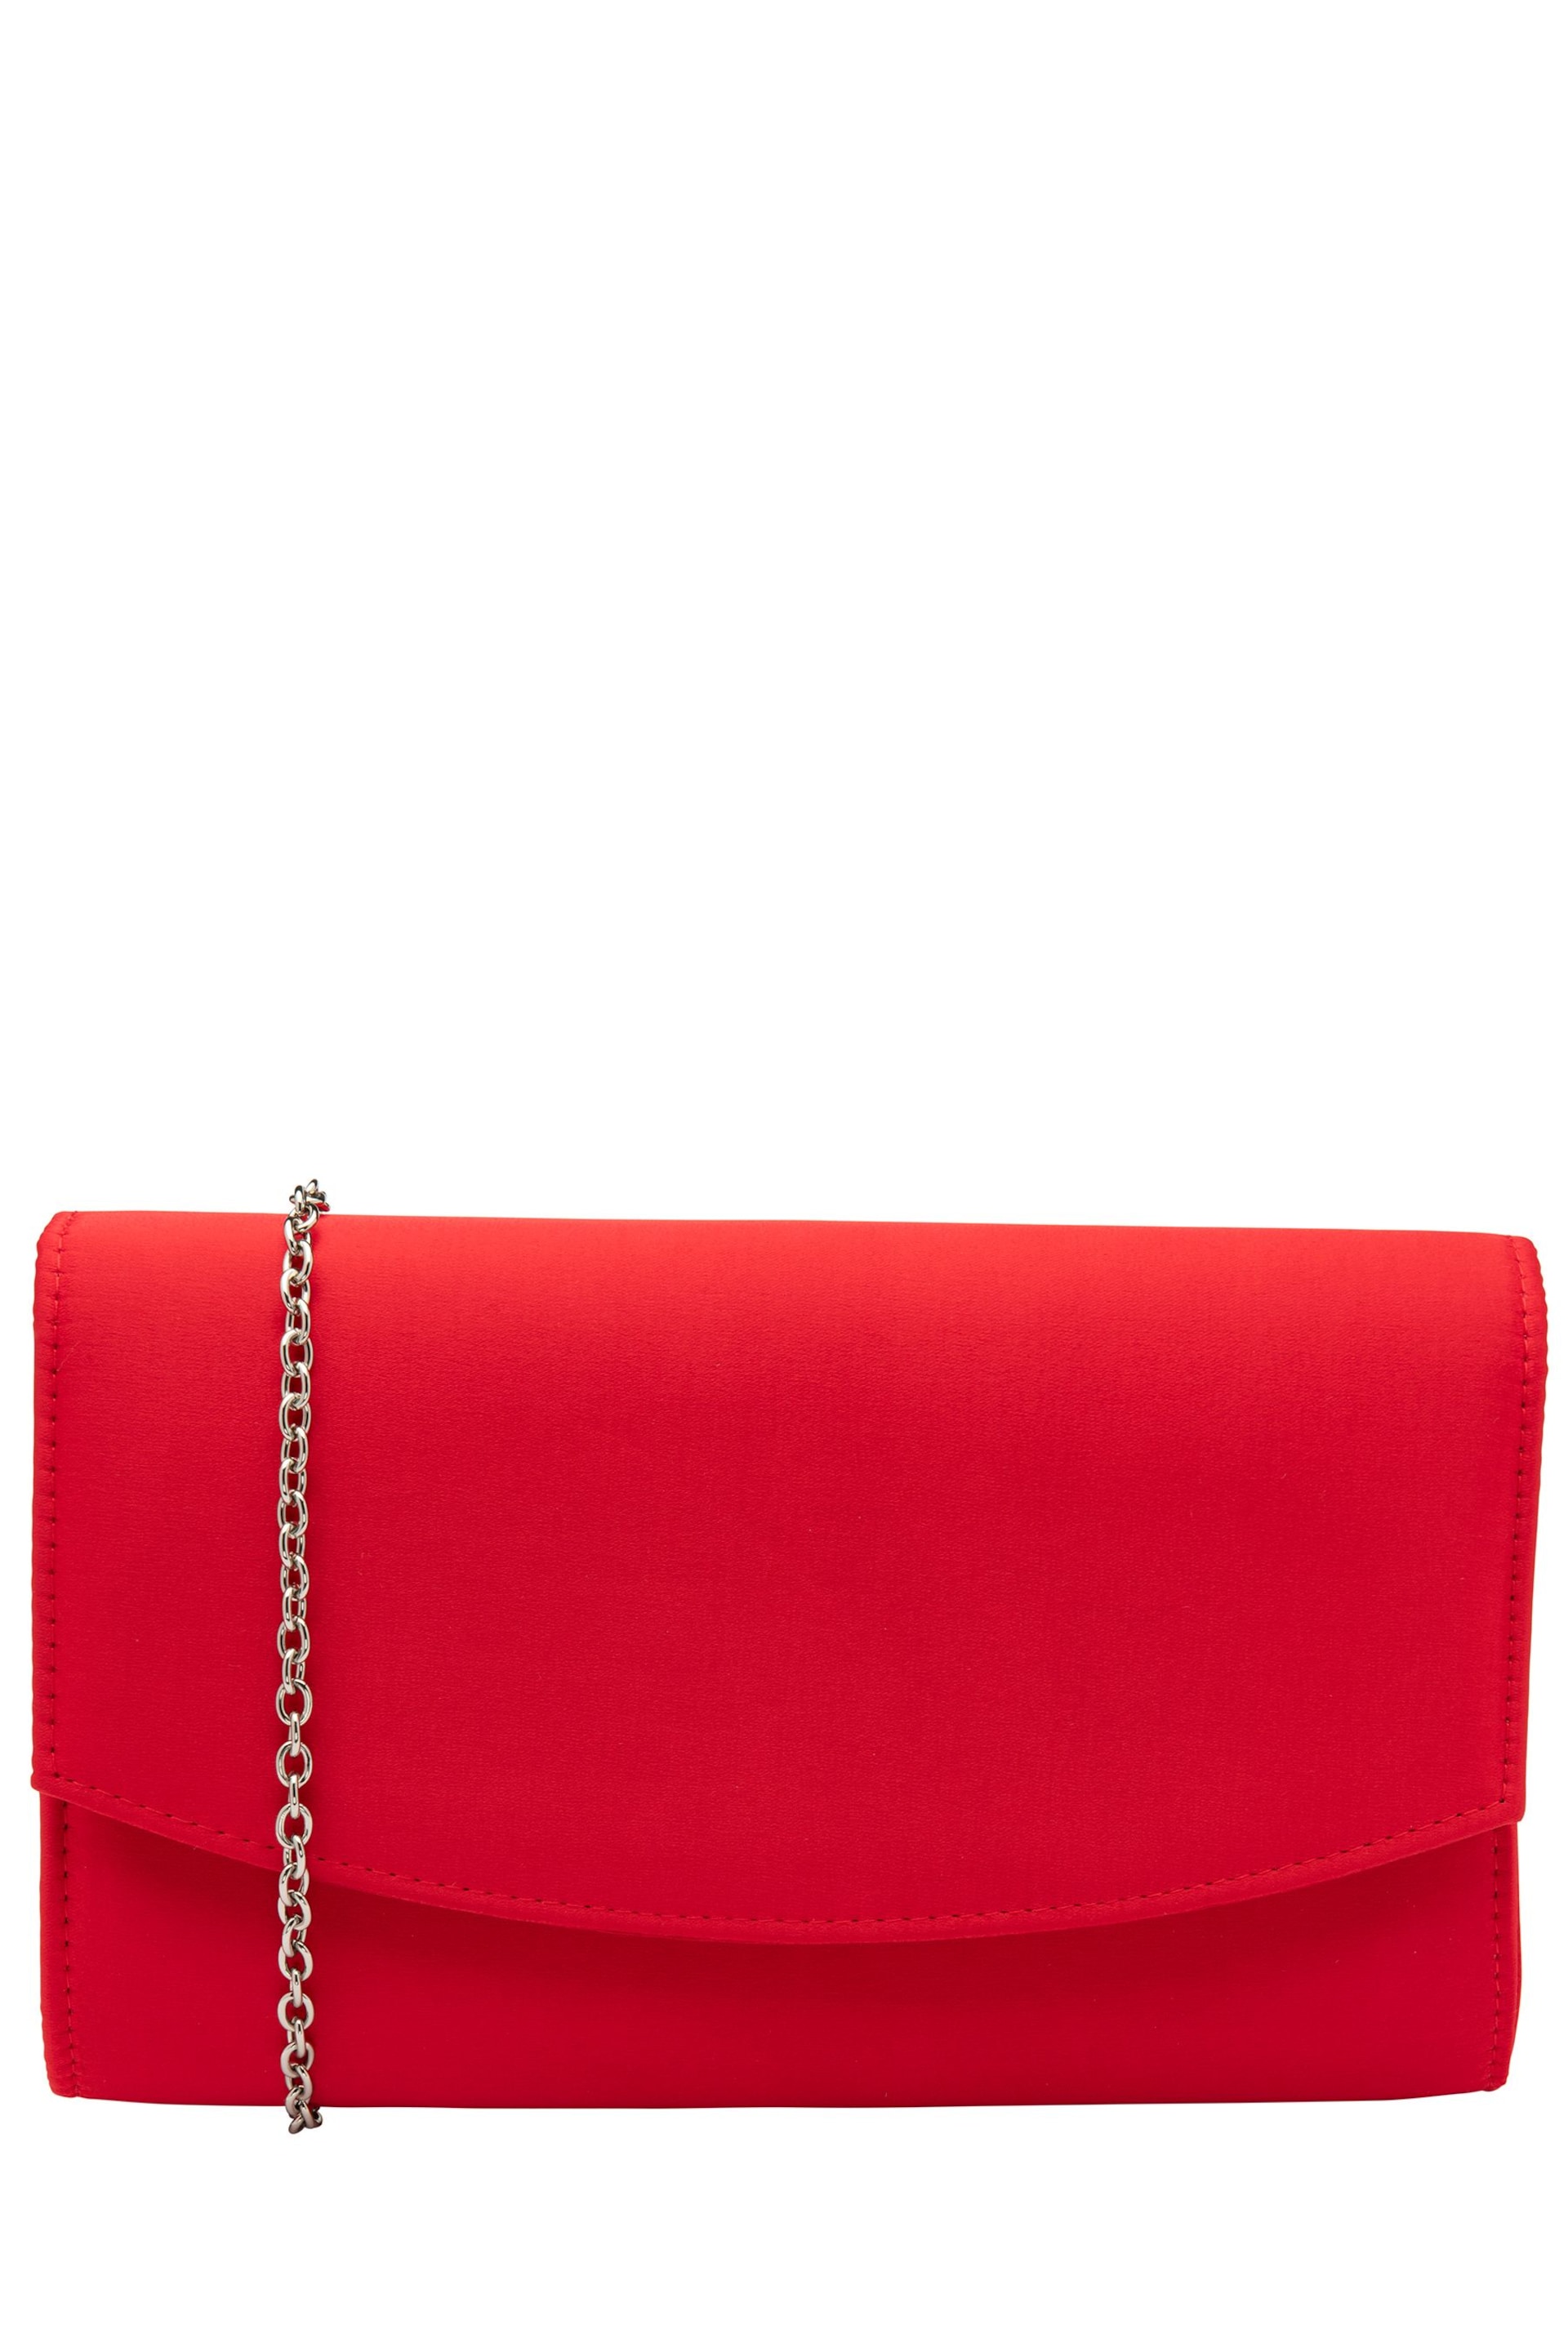 Ravel Red Clutch Bag with Chain - Image 1 of 4